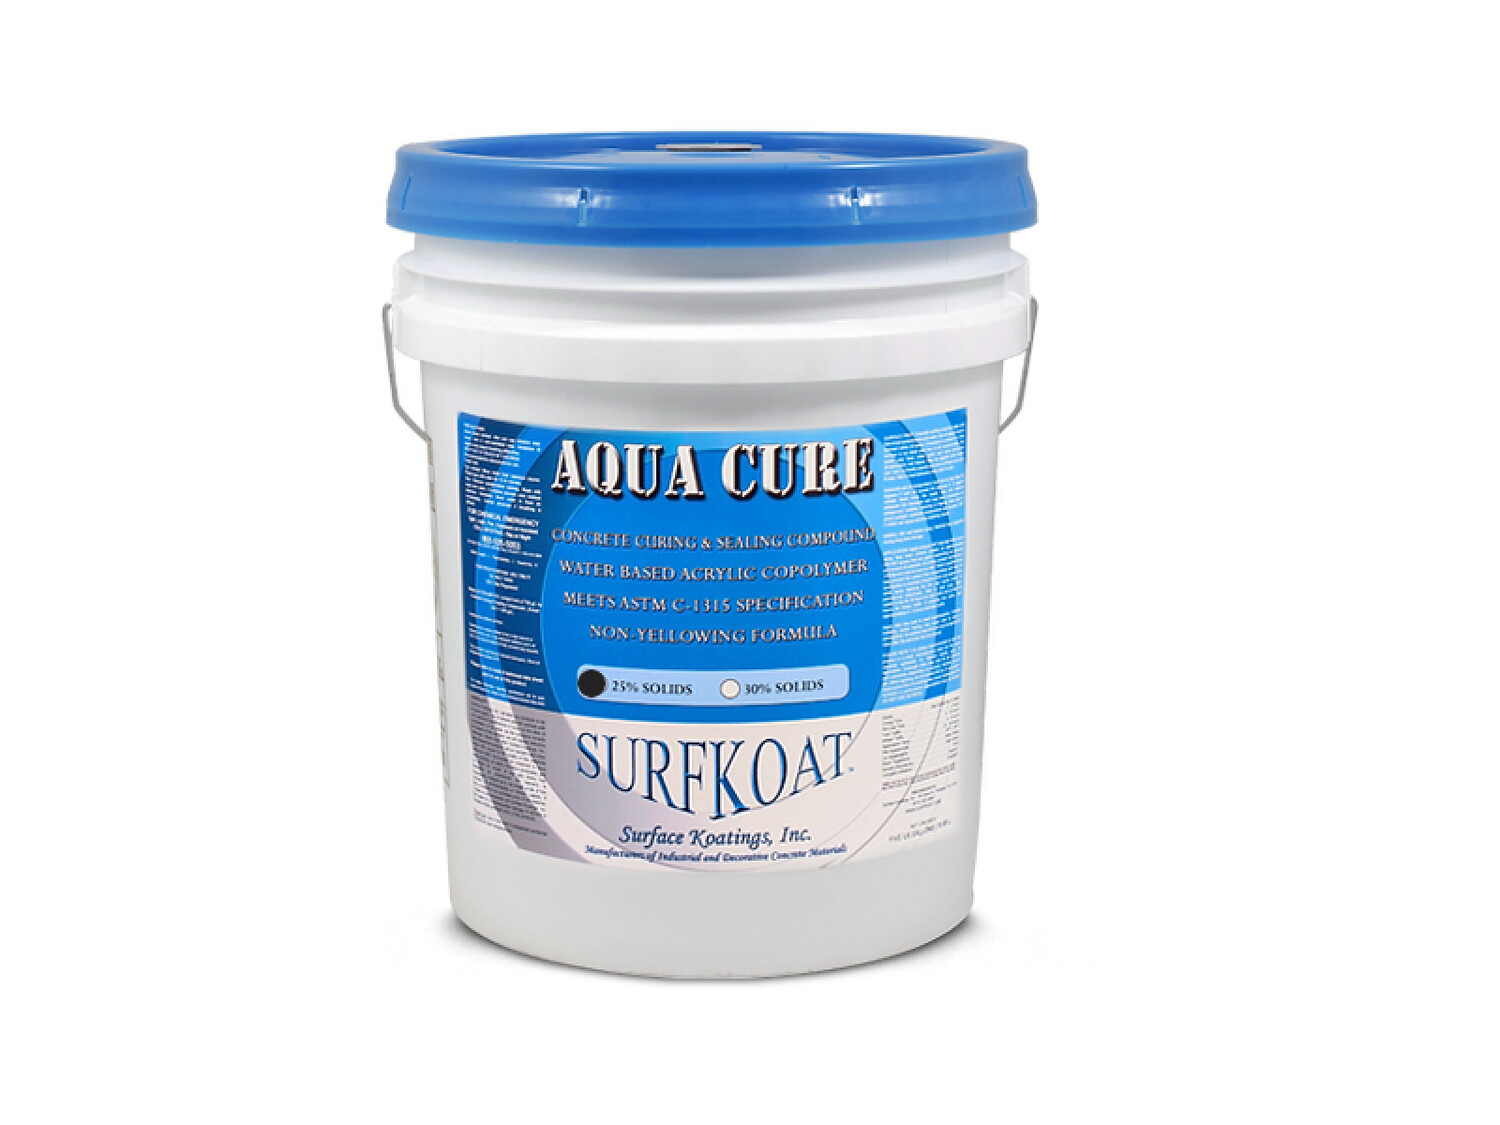 SurfKoat AQUA CURE 25 - 25% Solids Water Based Curing & Sealing Compound 5G